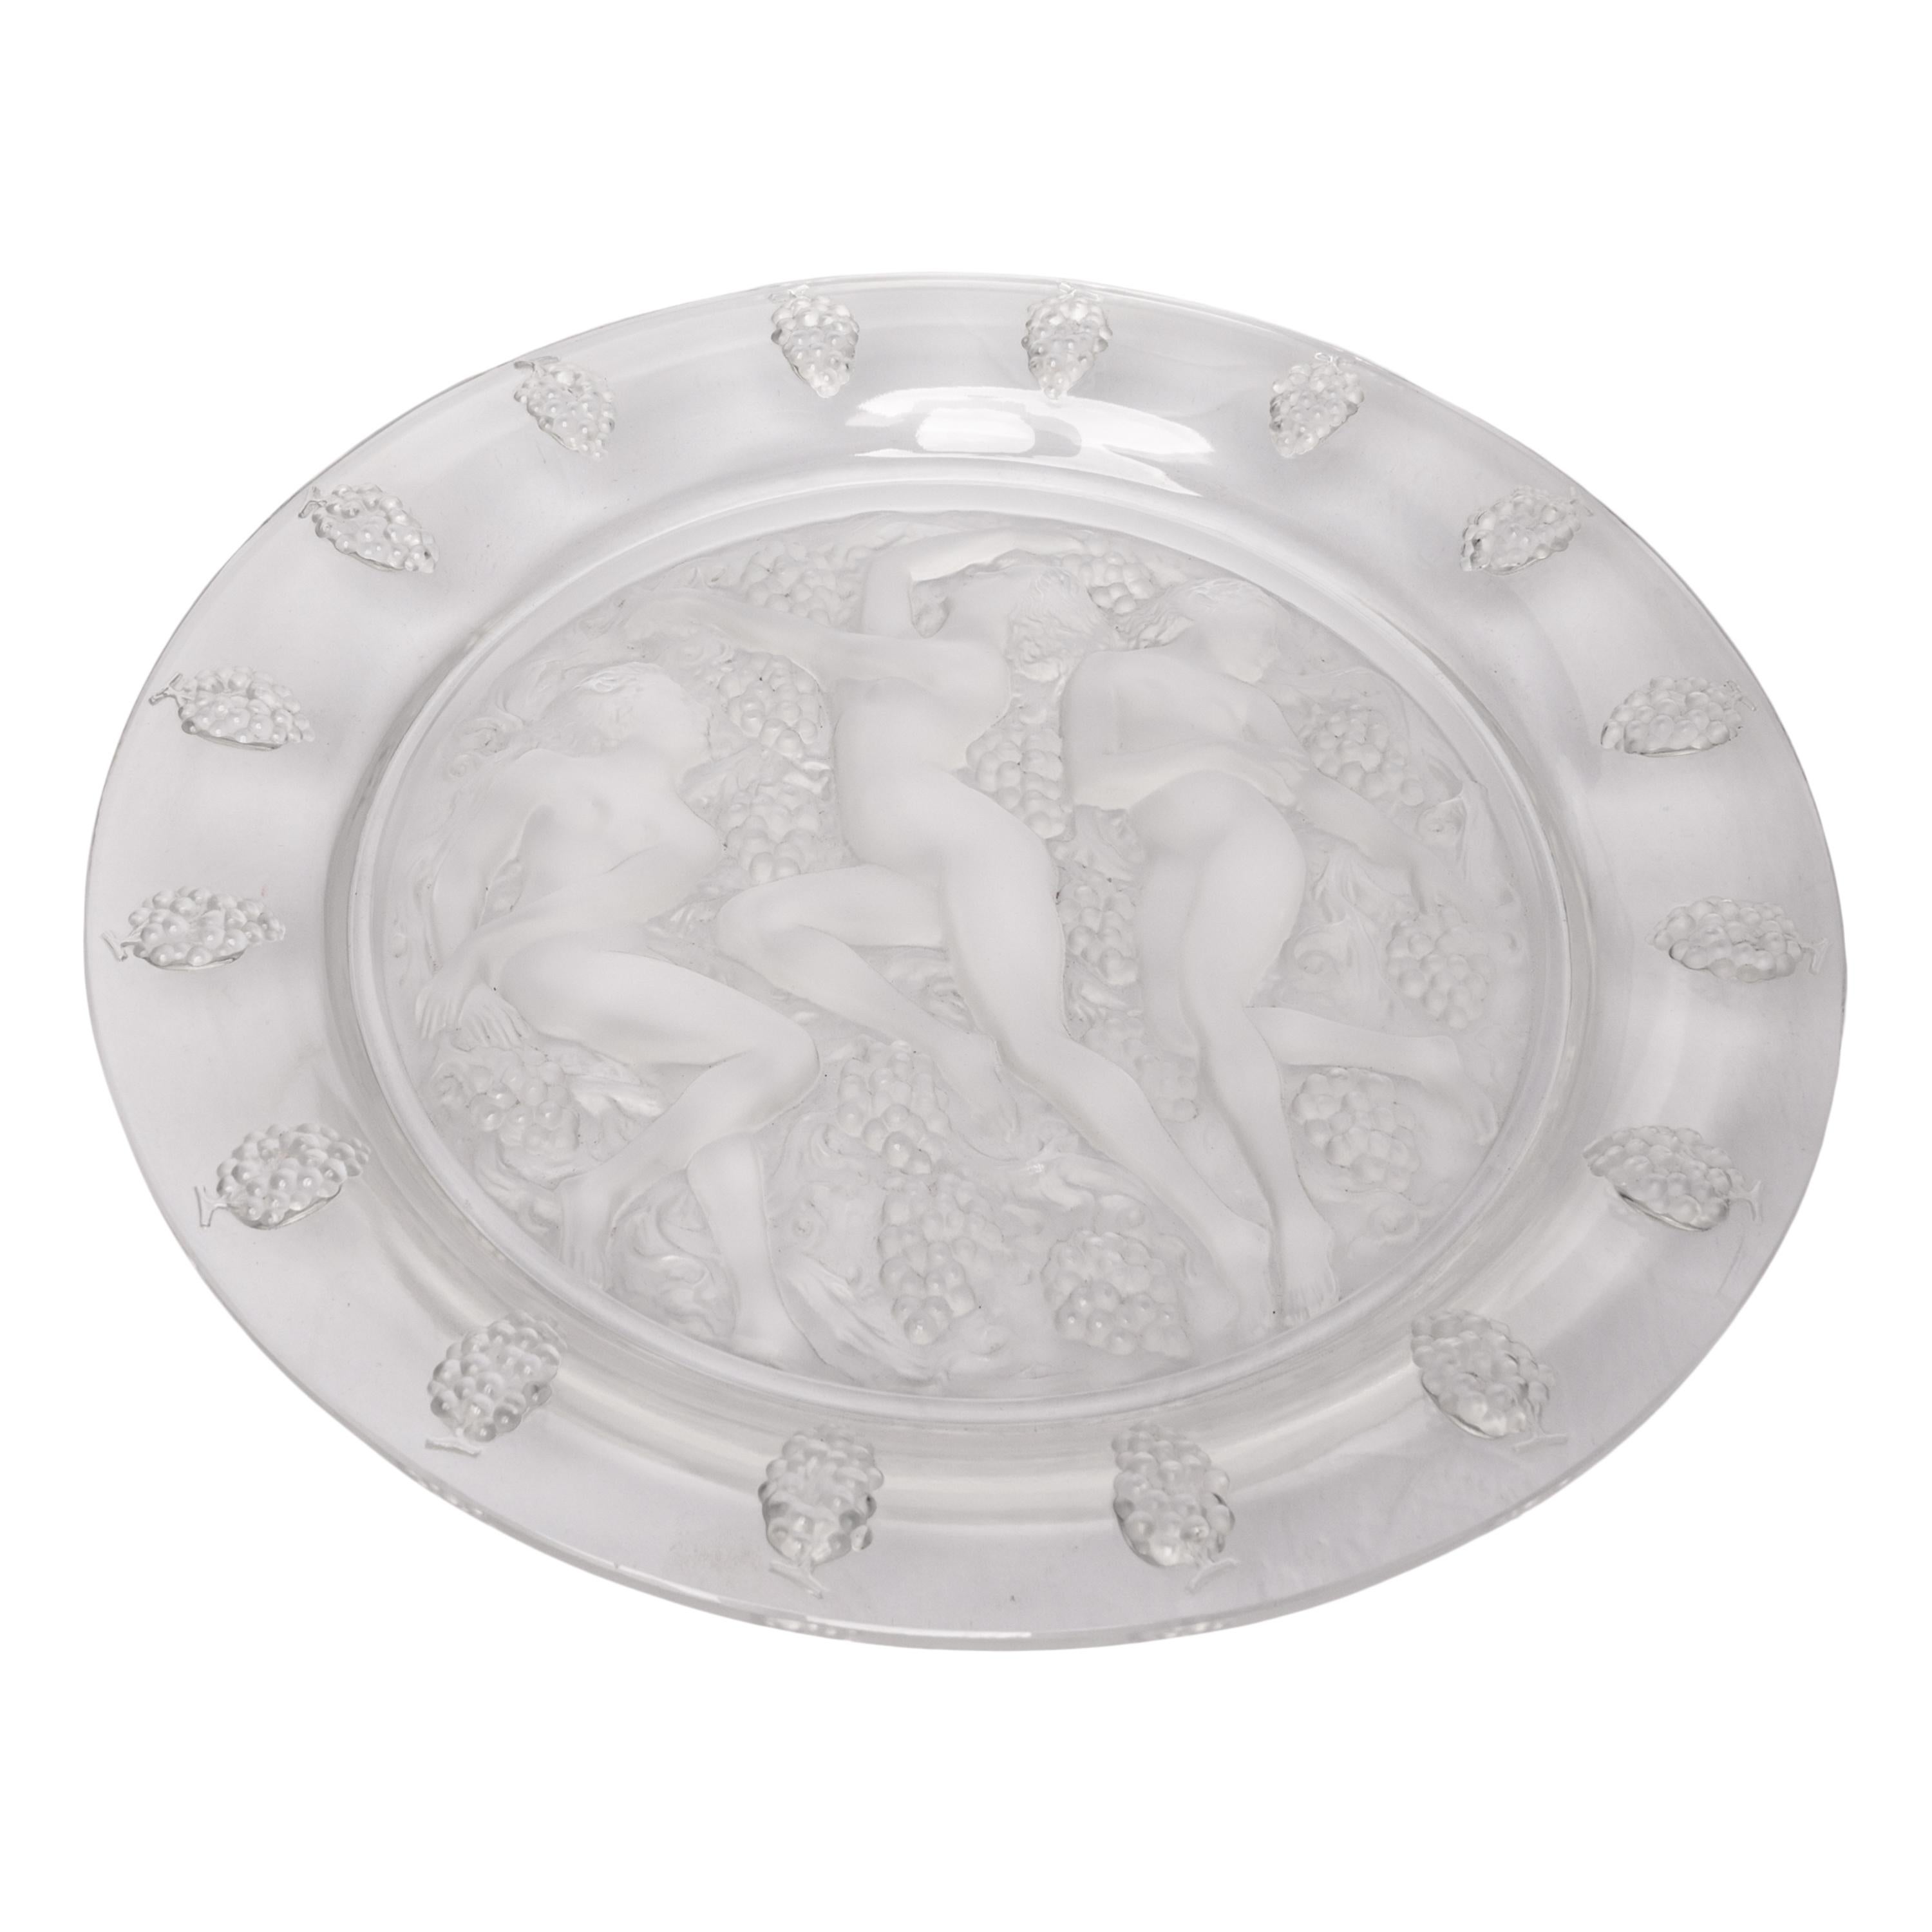 A large French Art Deco Cote d'Or (Bachantes) Lalique platter, signed, 1943.

The glass with elevated curved grapes decorated rim & frosted central section having three nude cavorting females amongst grapes; Clear round glass the elevated rim